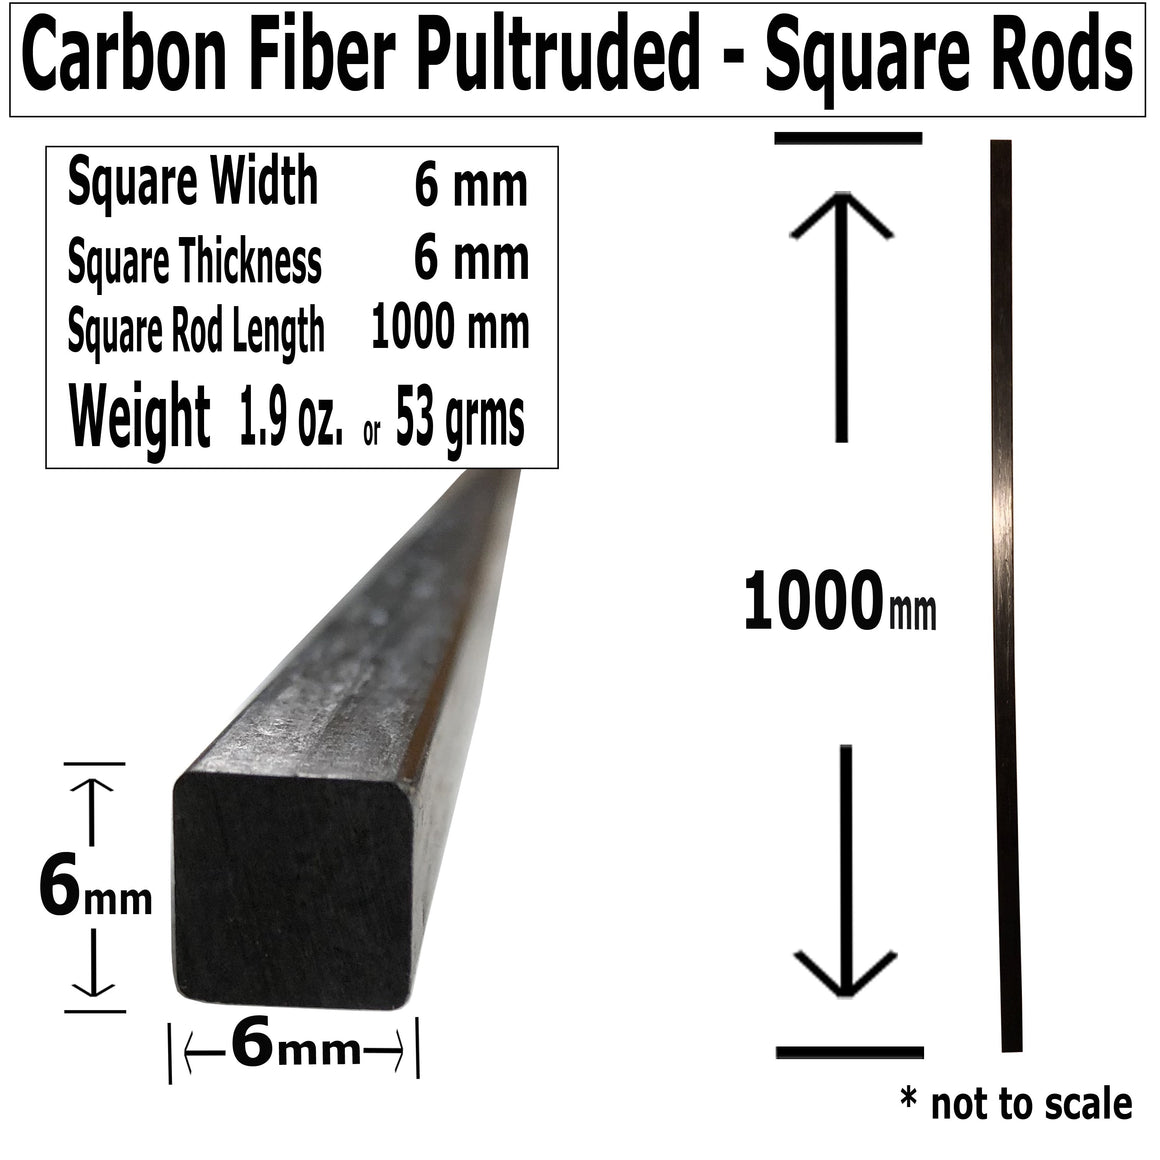 (1) 6mm X 1000mm - PULTRUDED-Square Carbon Fiber Rod. 100% Pultruded high Strength Carbon Fiber. Used for Drones, Radio Controlled Vehicles. Projects requiring high Strength to Weight Components.